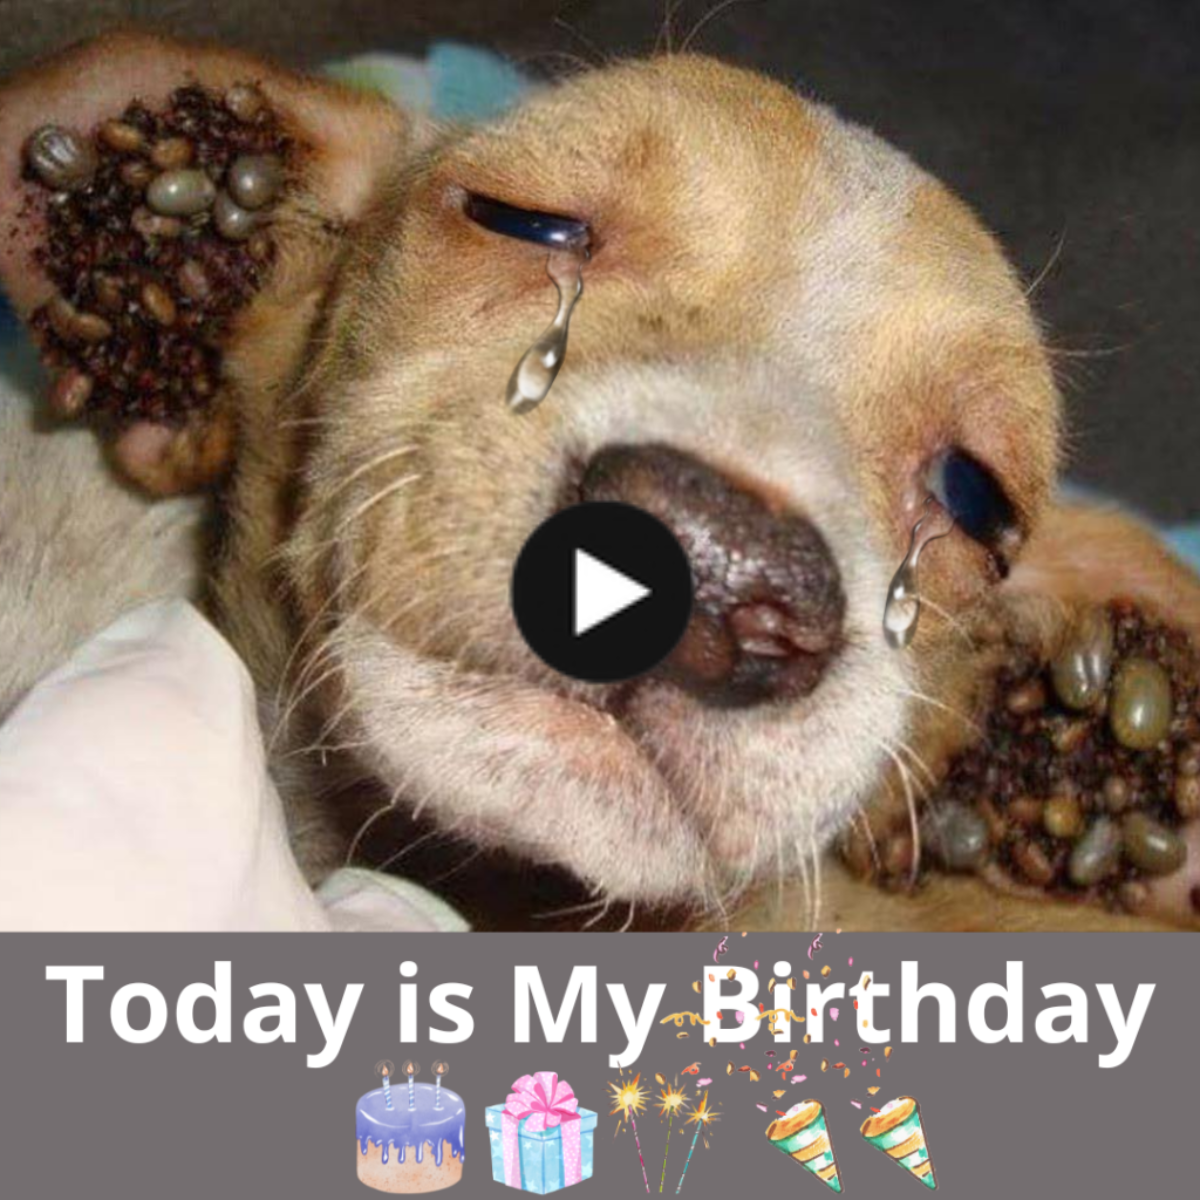 A sincere birthday wish with the hope of easing the pain of a dog whose owner despised him with ticks all over his ears, making him cry in pain.